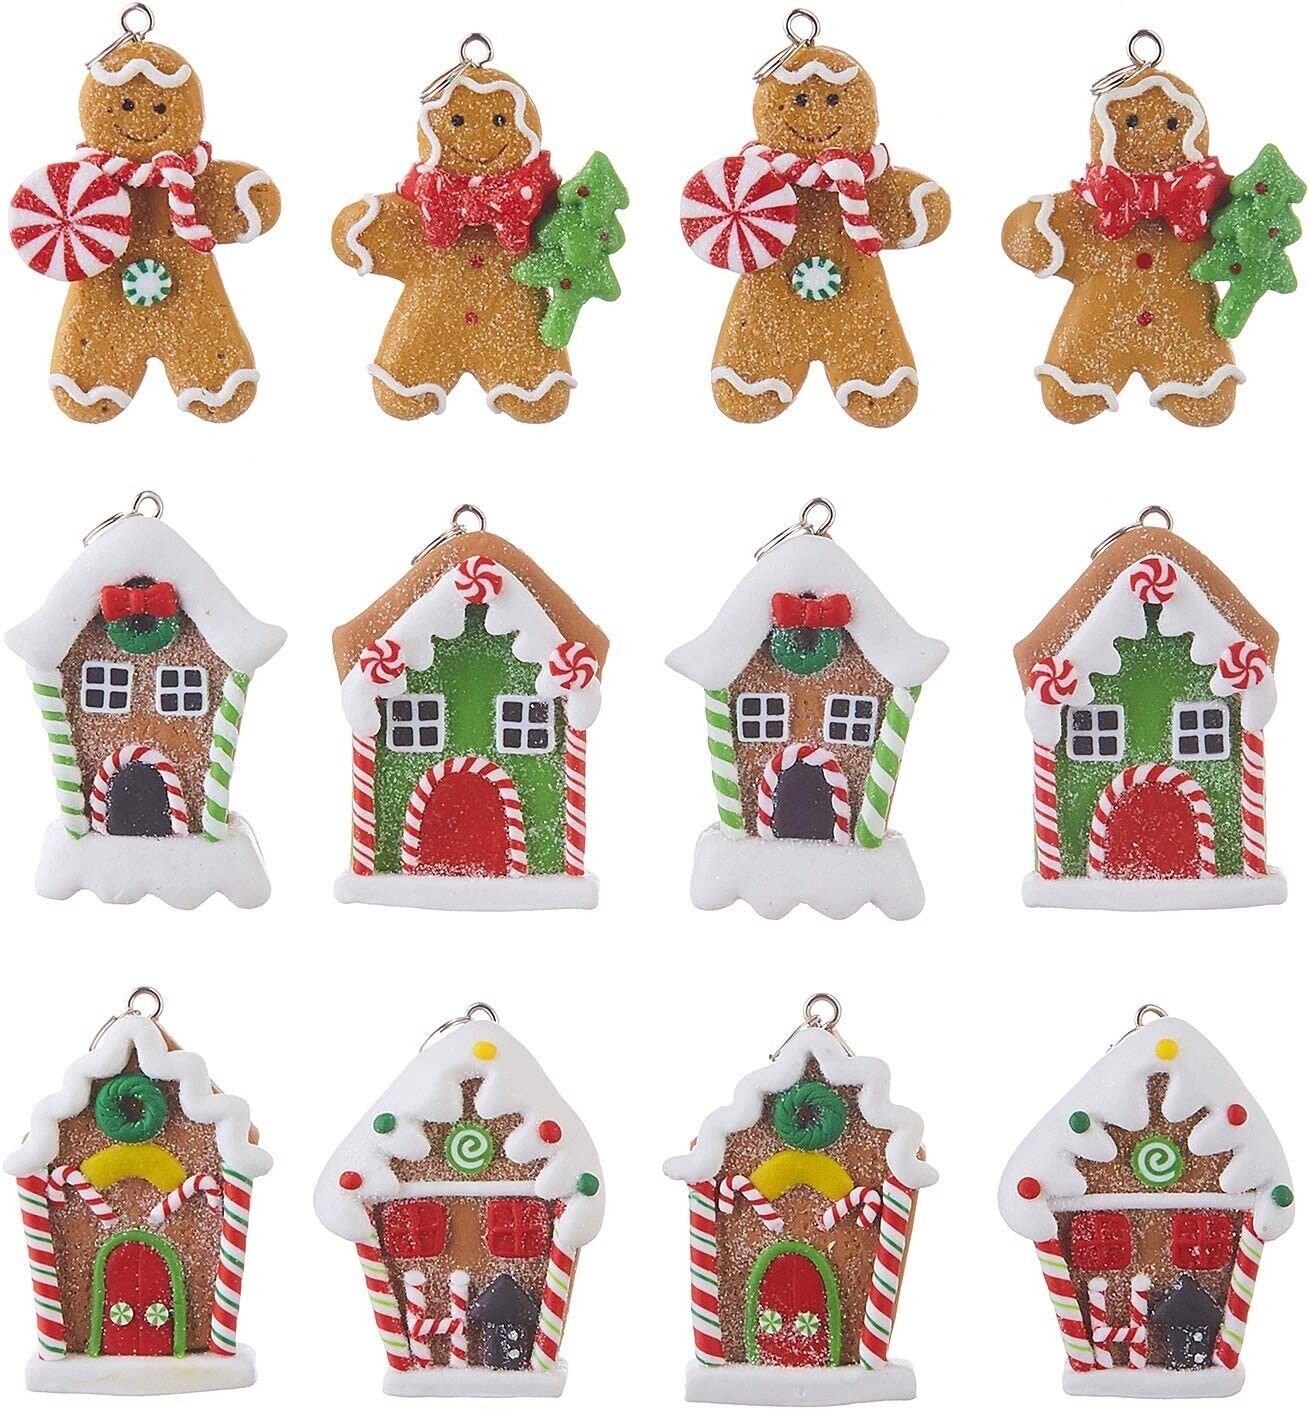 Holiday Theme Gingerbread Ornaments Boxed Set of 12 Christmas Ornaments 